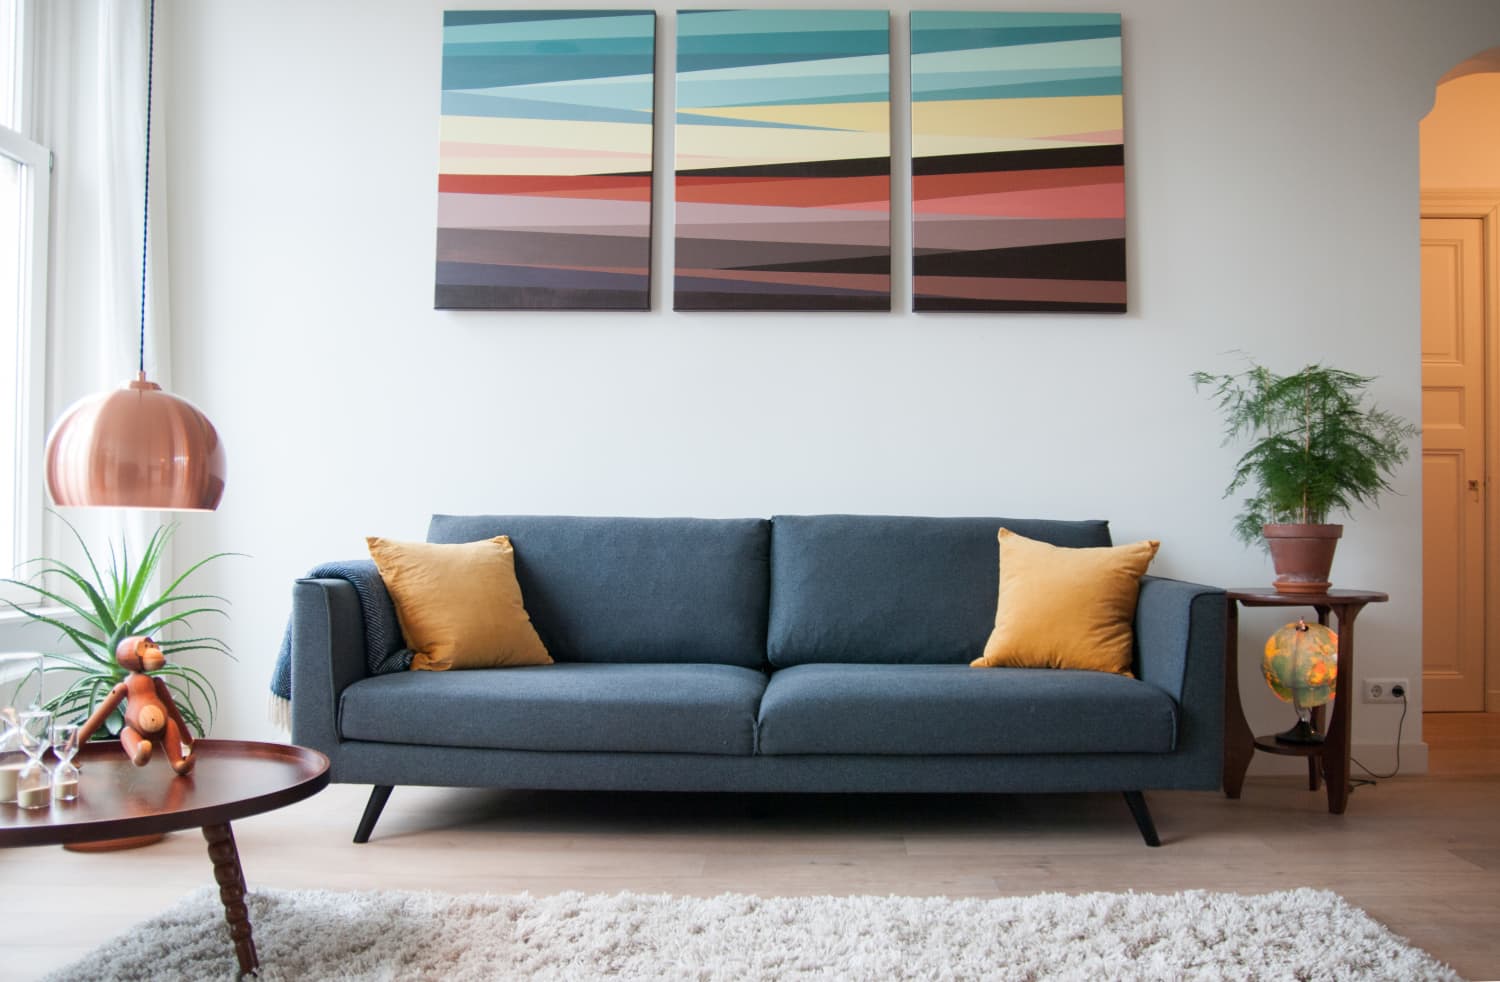 10 Best Cheap Sleeper Sofas Under $500 | Apartment Therapy